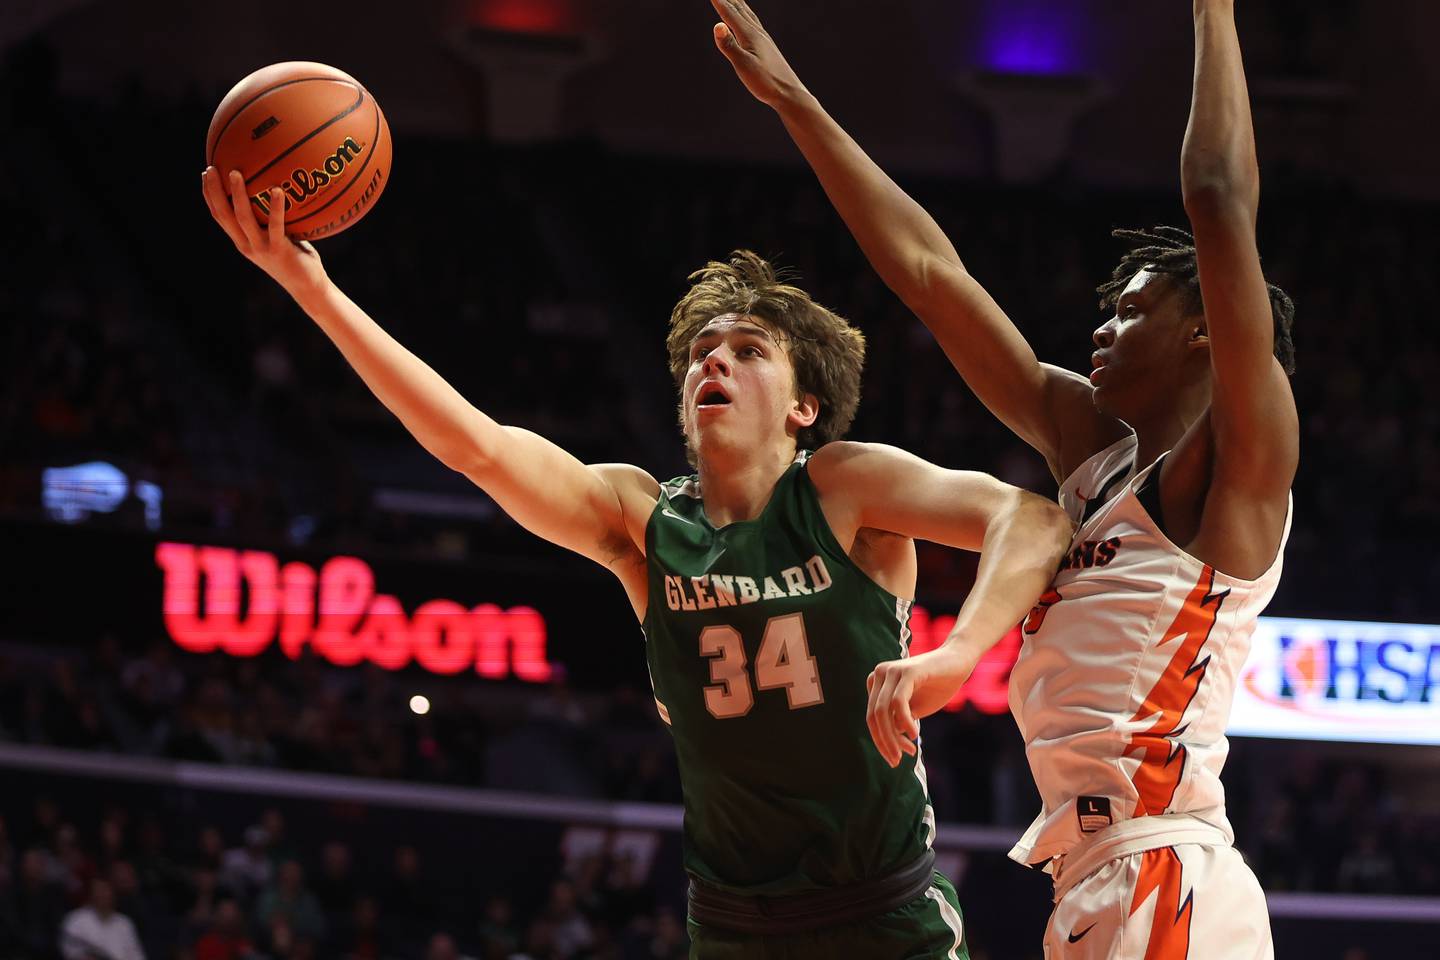 Glenbard West’s Braden Huff lays in a shot against Whitney Young in the Class 4A championship game at State Farm Center in Champaign. Saturday, Mar. 12, 2022, in Champaign.